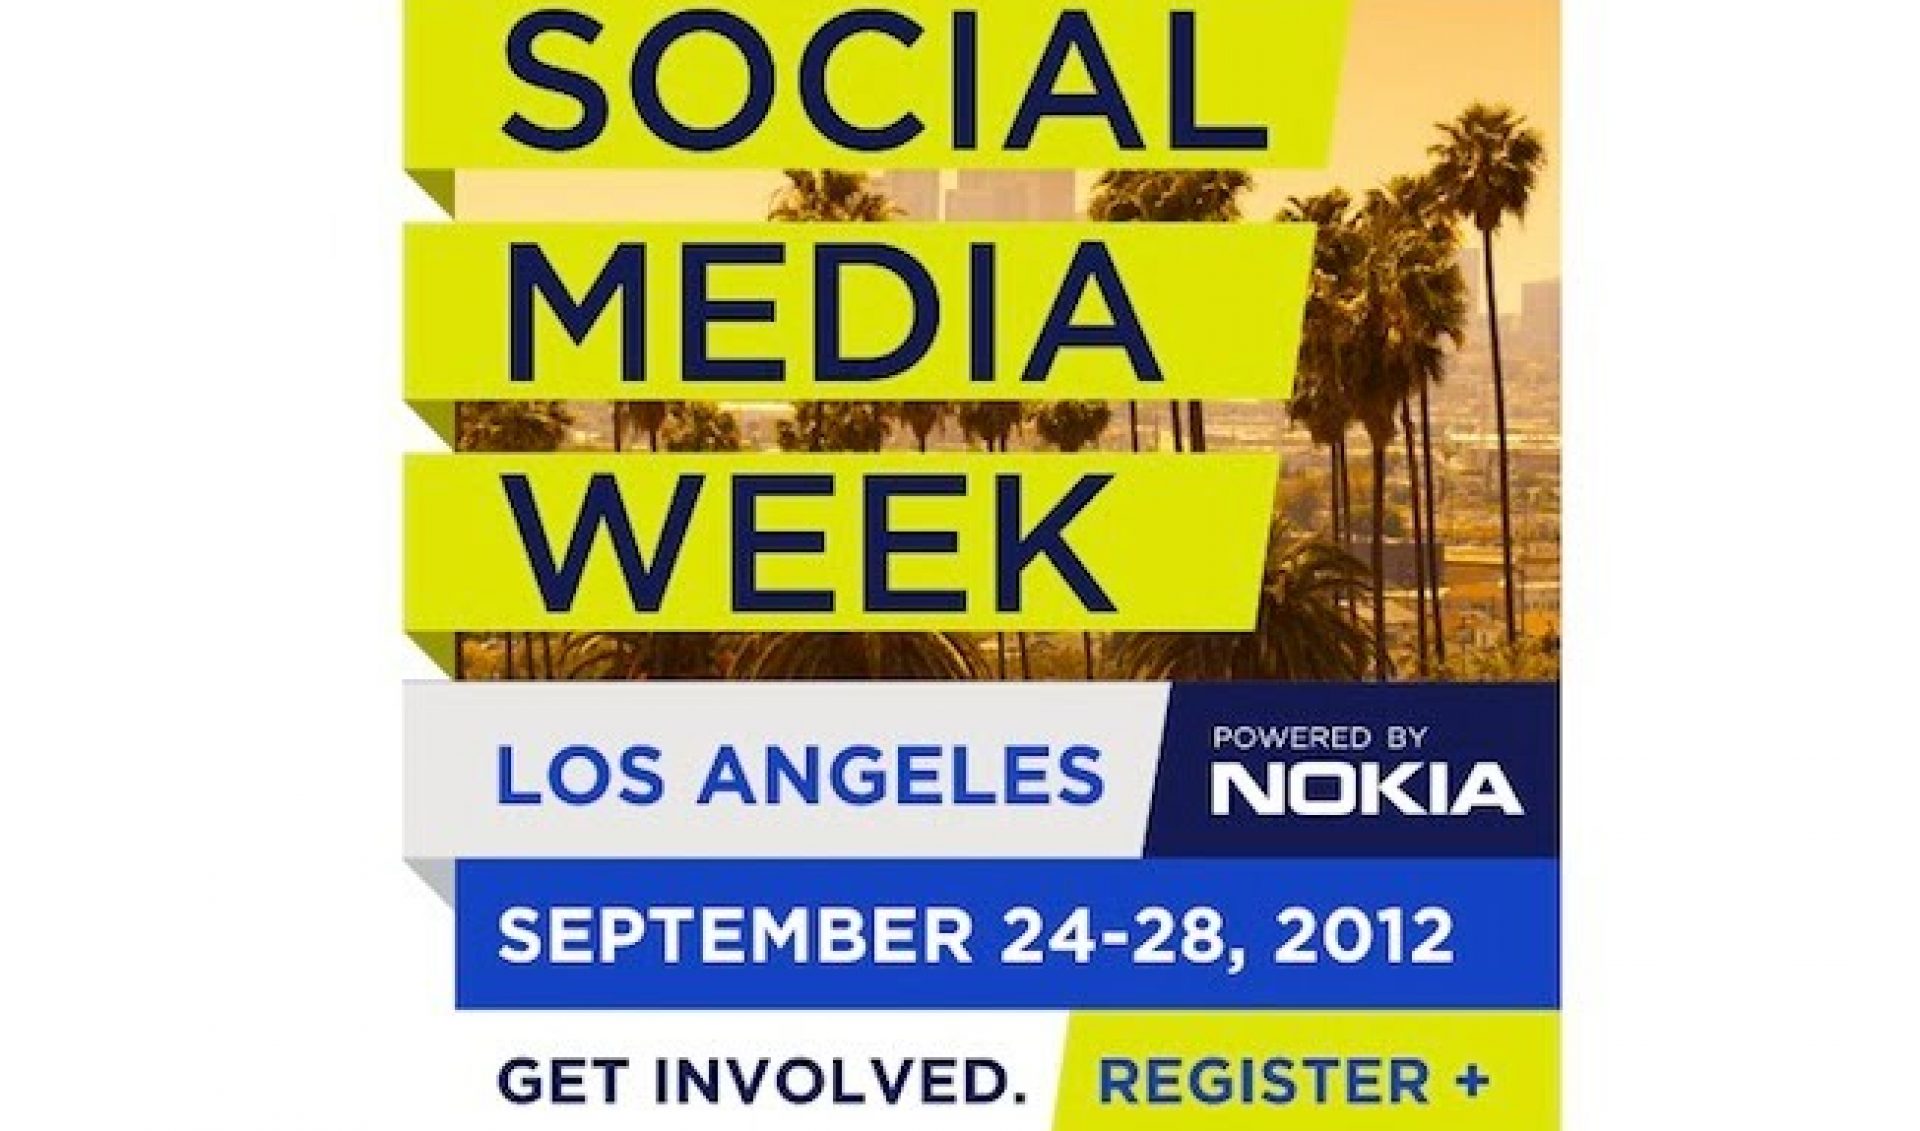 #SMWLA Wraps Up On Friday With Larry King, Jeff Cole, And A Streamys Sighting